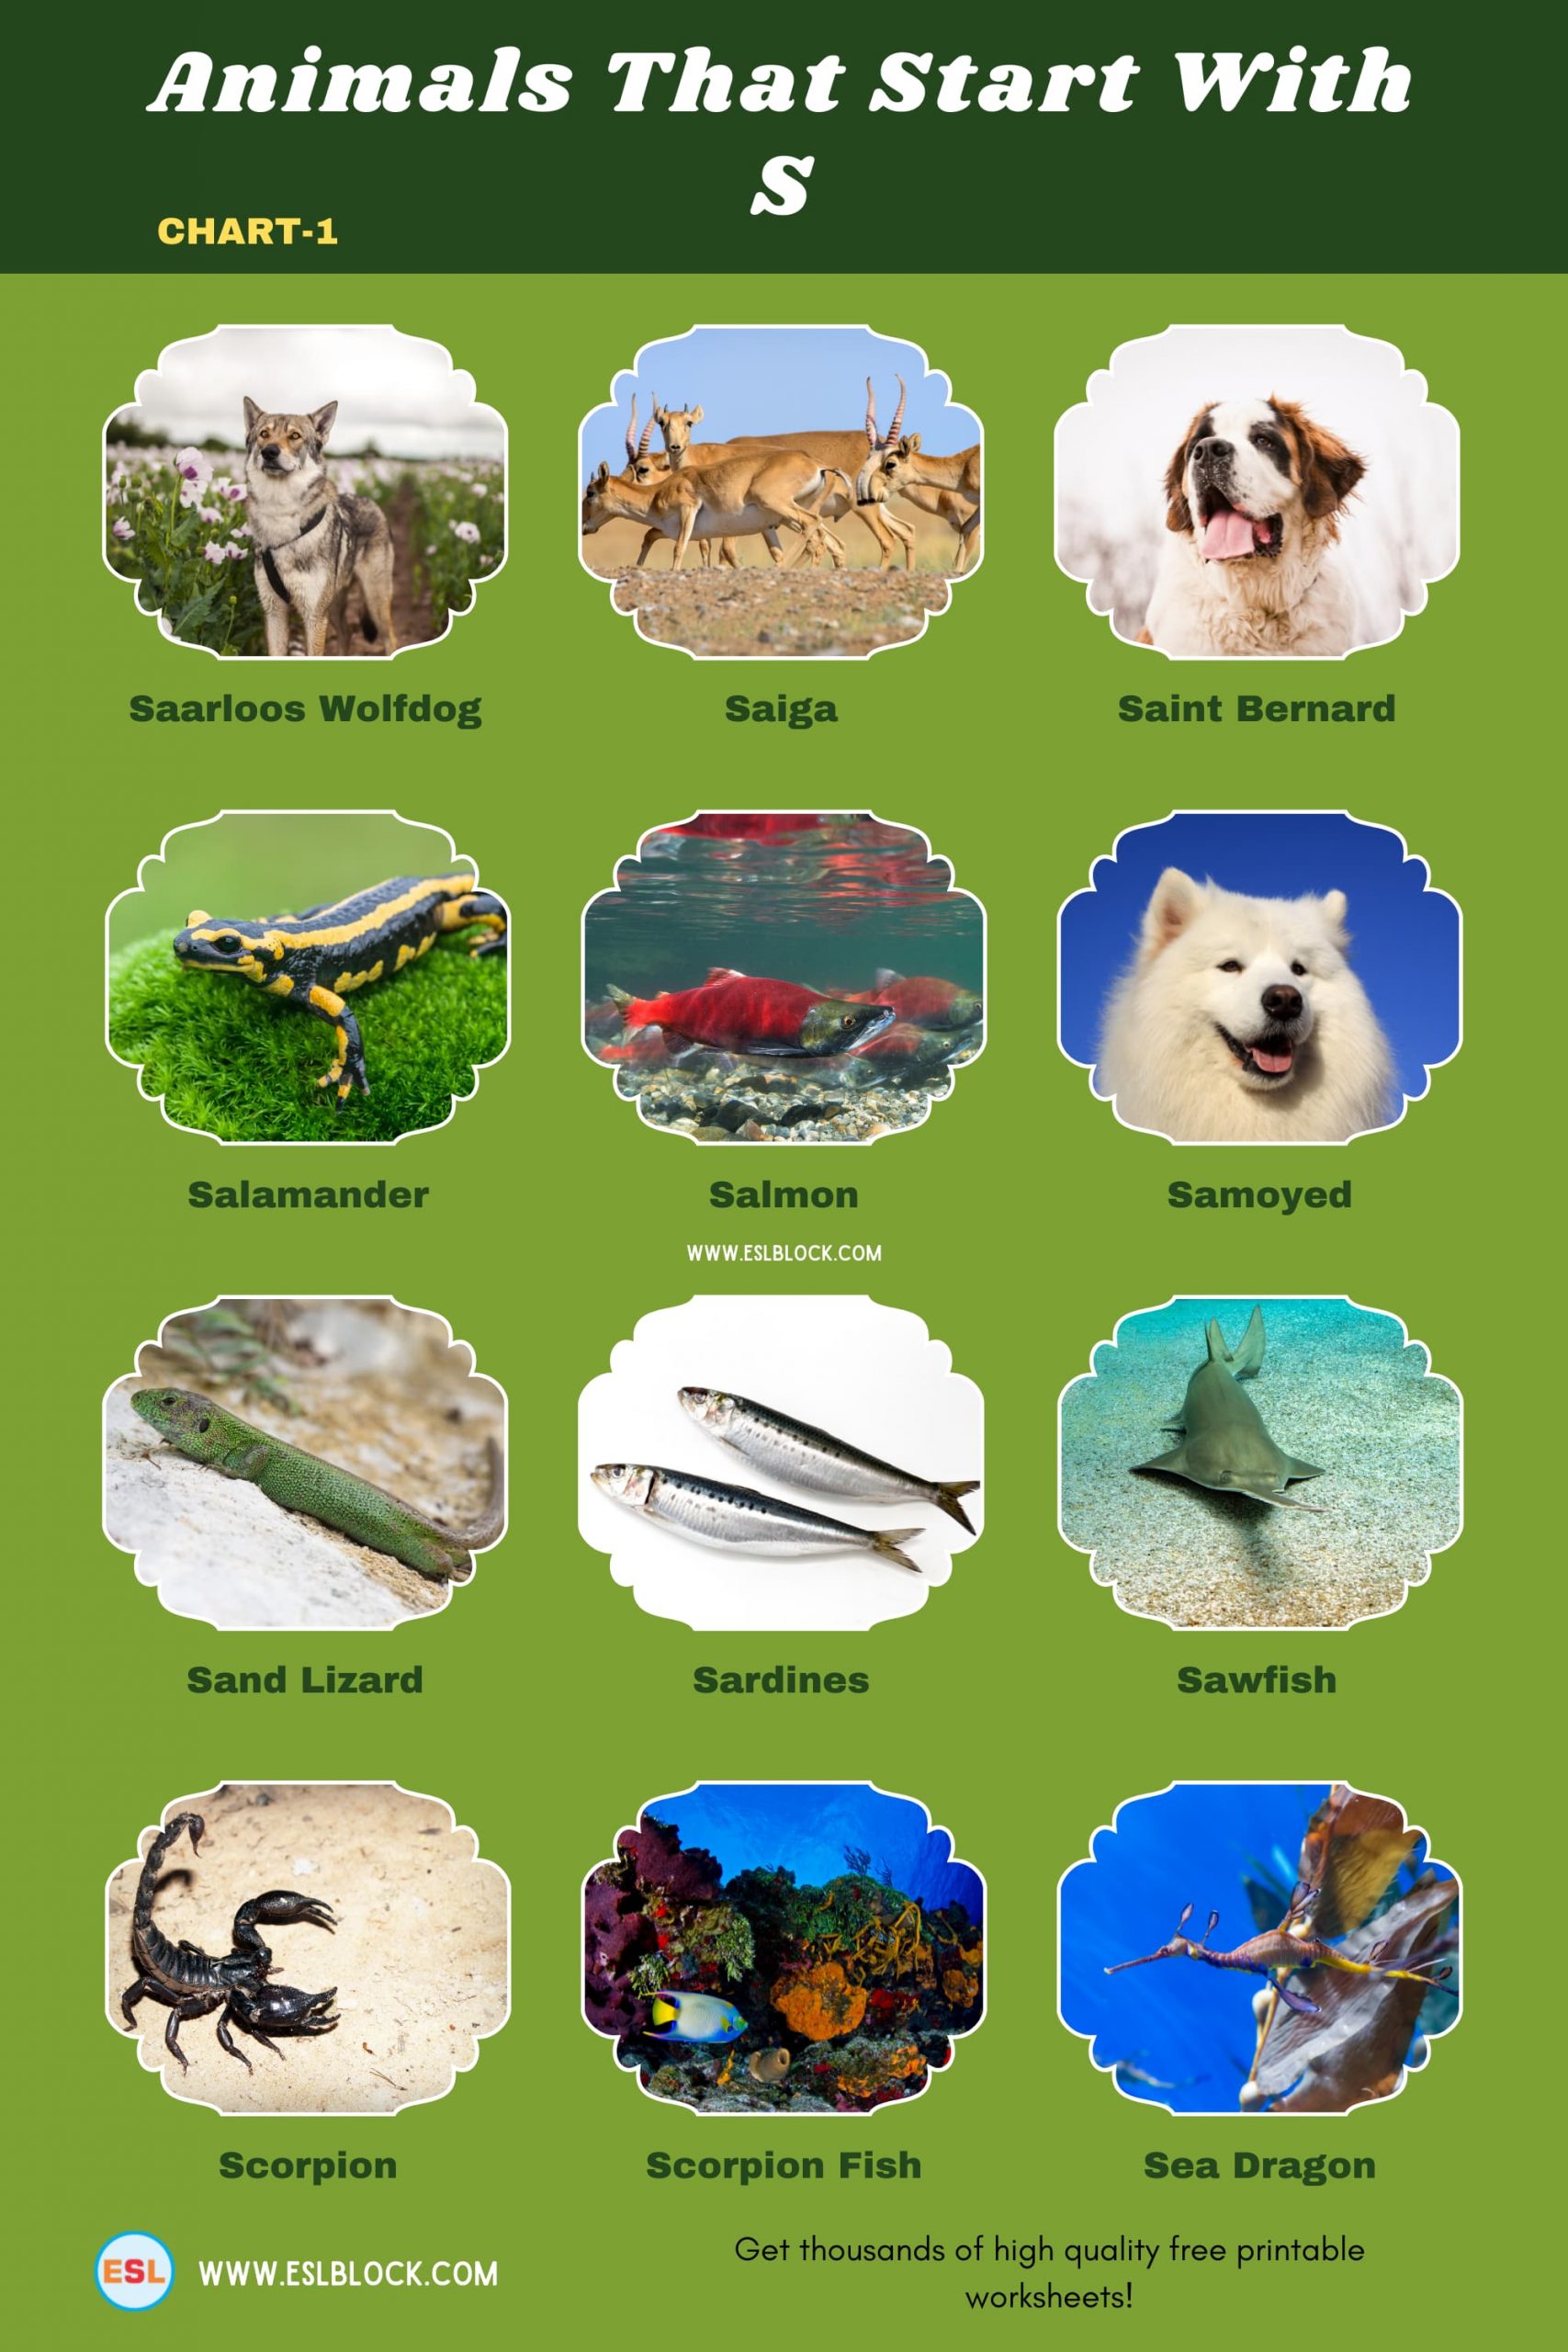 5 Letter Animals Starting With S, Animals List, Animals Names, Animals That Begins With S, Animals That Start With S, English, English Nouns, English Vocabulary, English Words, List of Animals That Start With S, Nouns, S Animals, S Animals in English, S Animals Names, Vocabulary